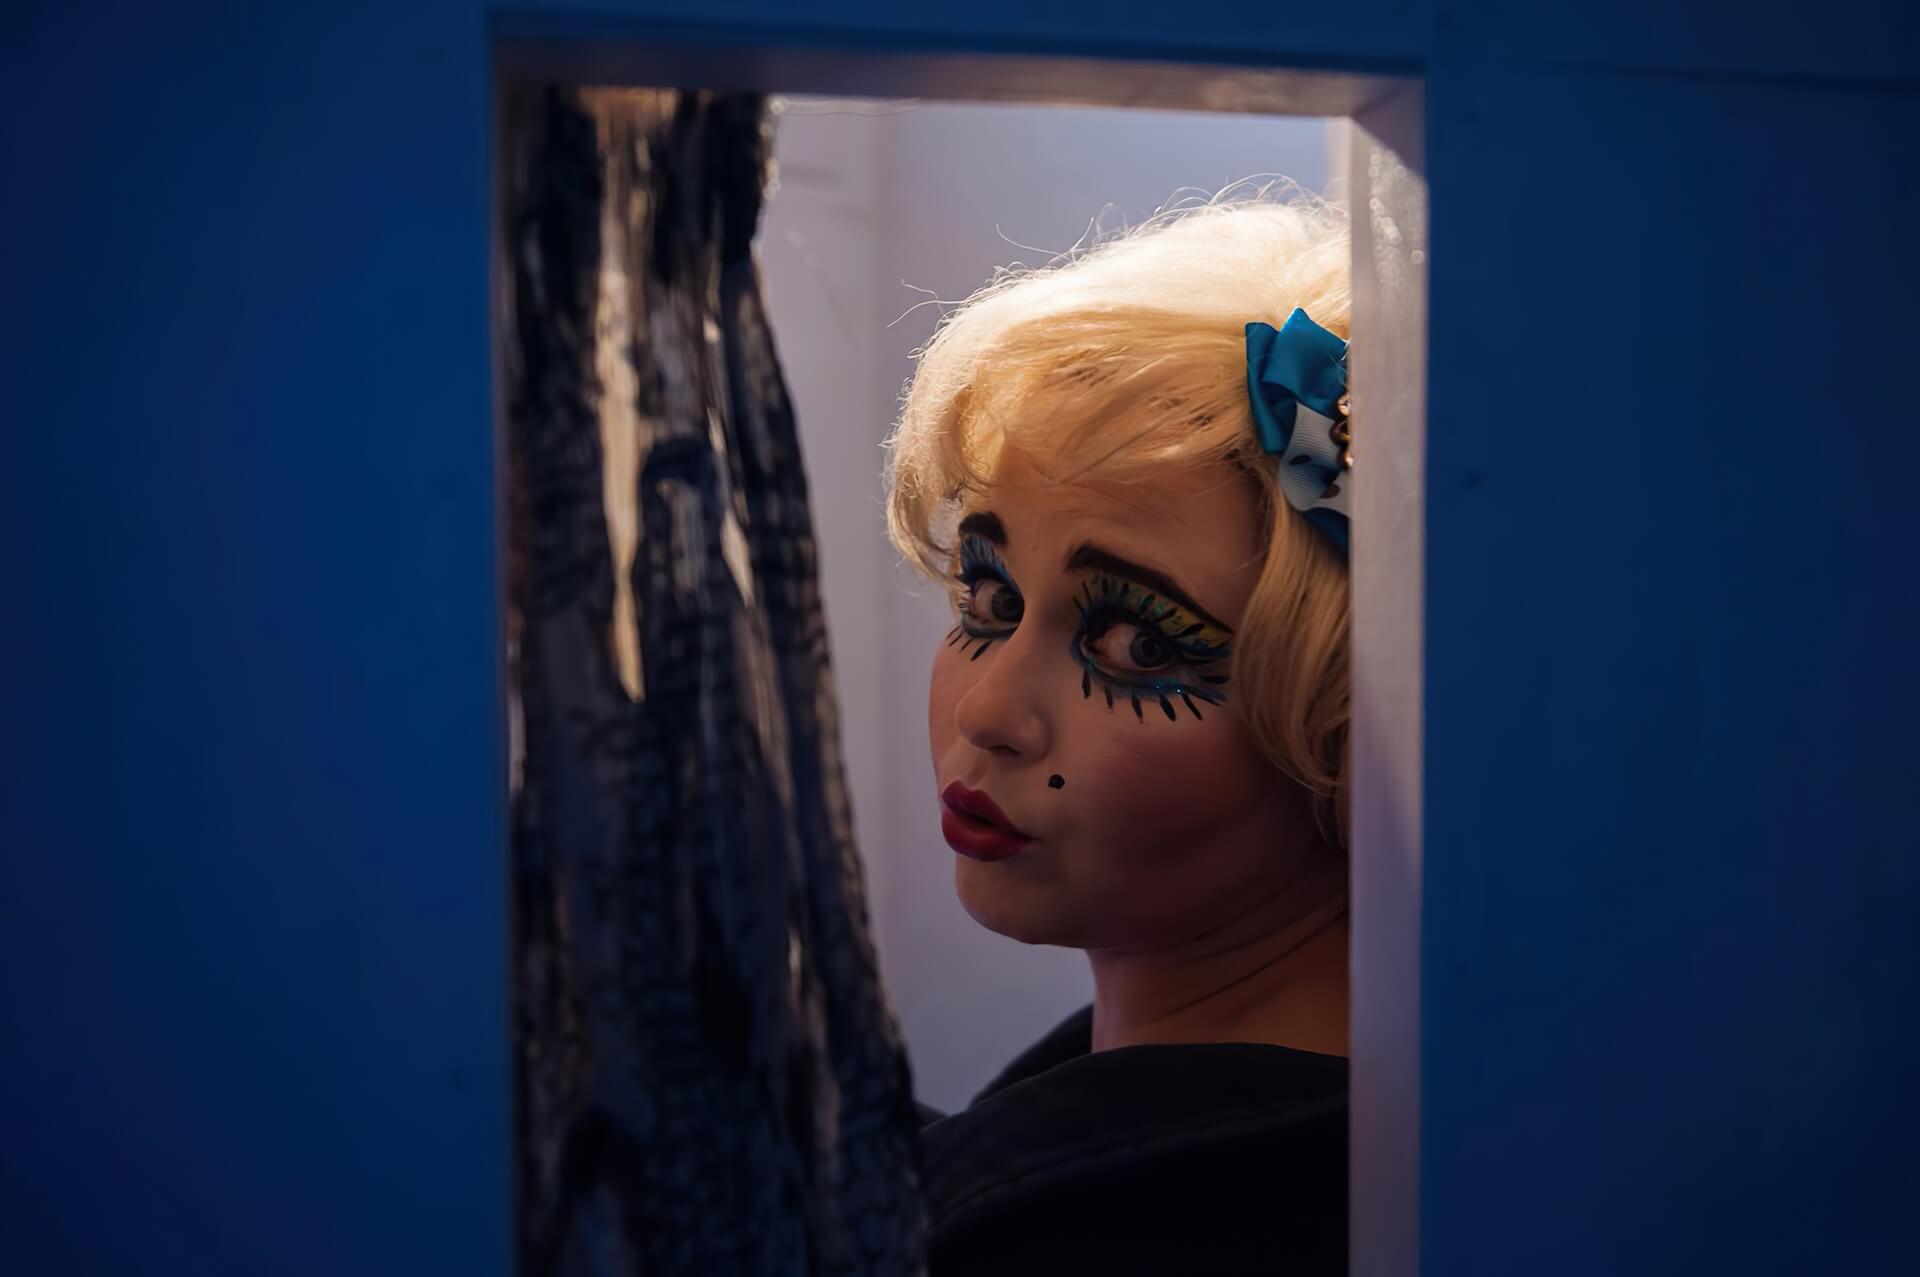 A woman with a heavy makeup looking at the camera through a small window